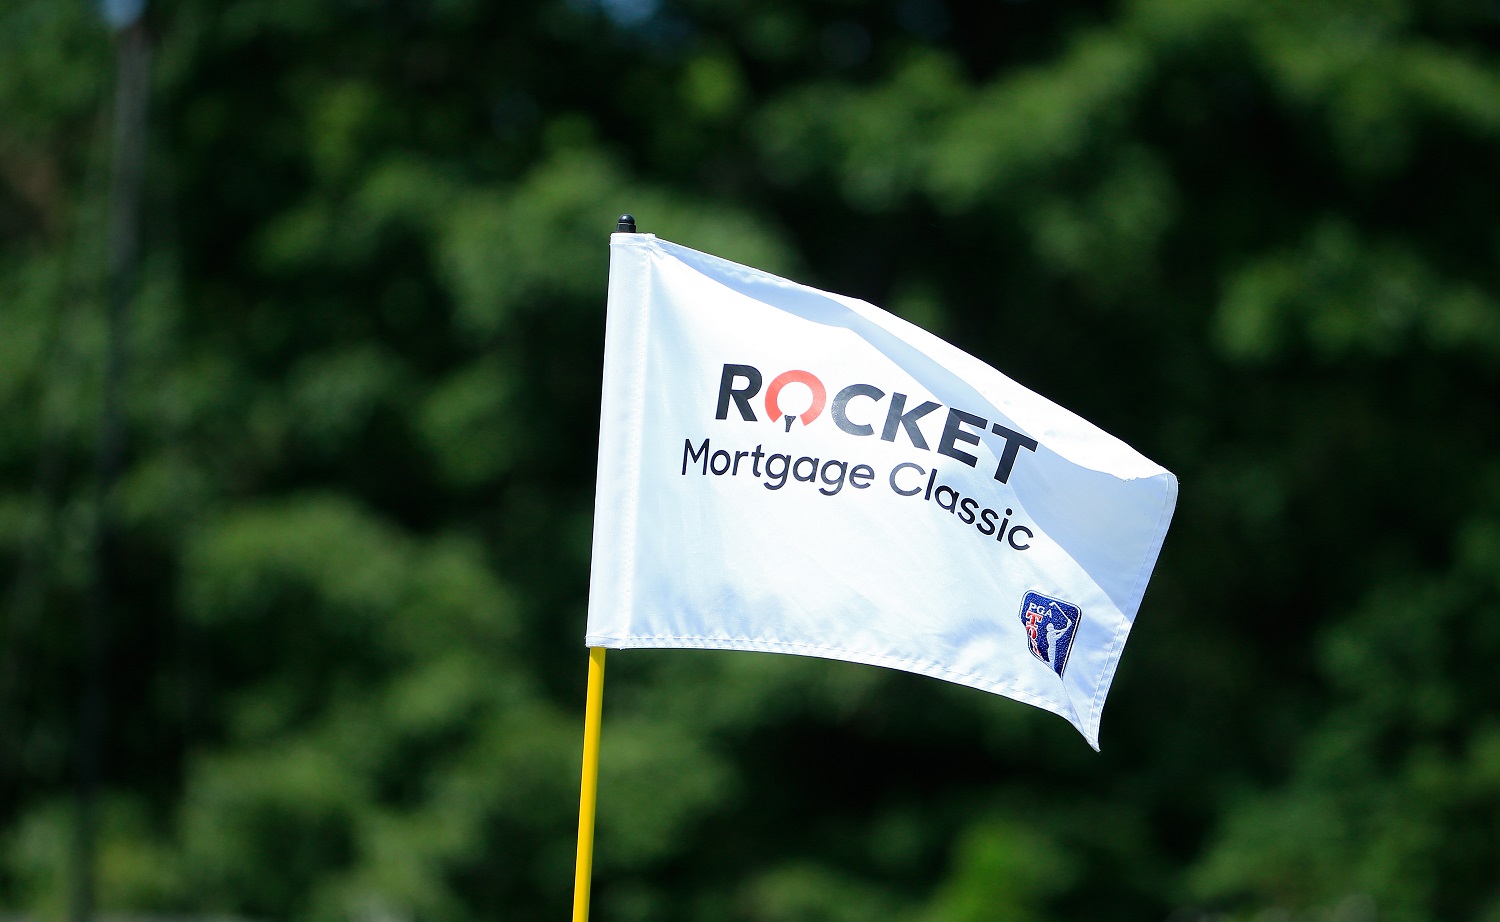 5 of the Top 20 Players in the World Are in the Field for the Rocket Mortgage Classic